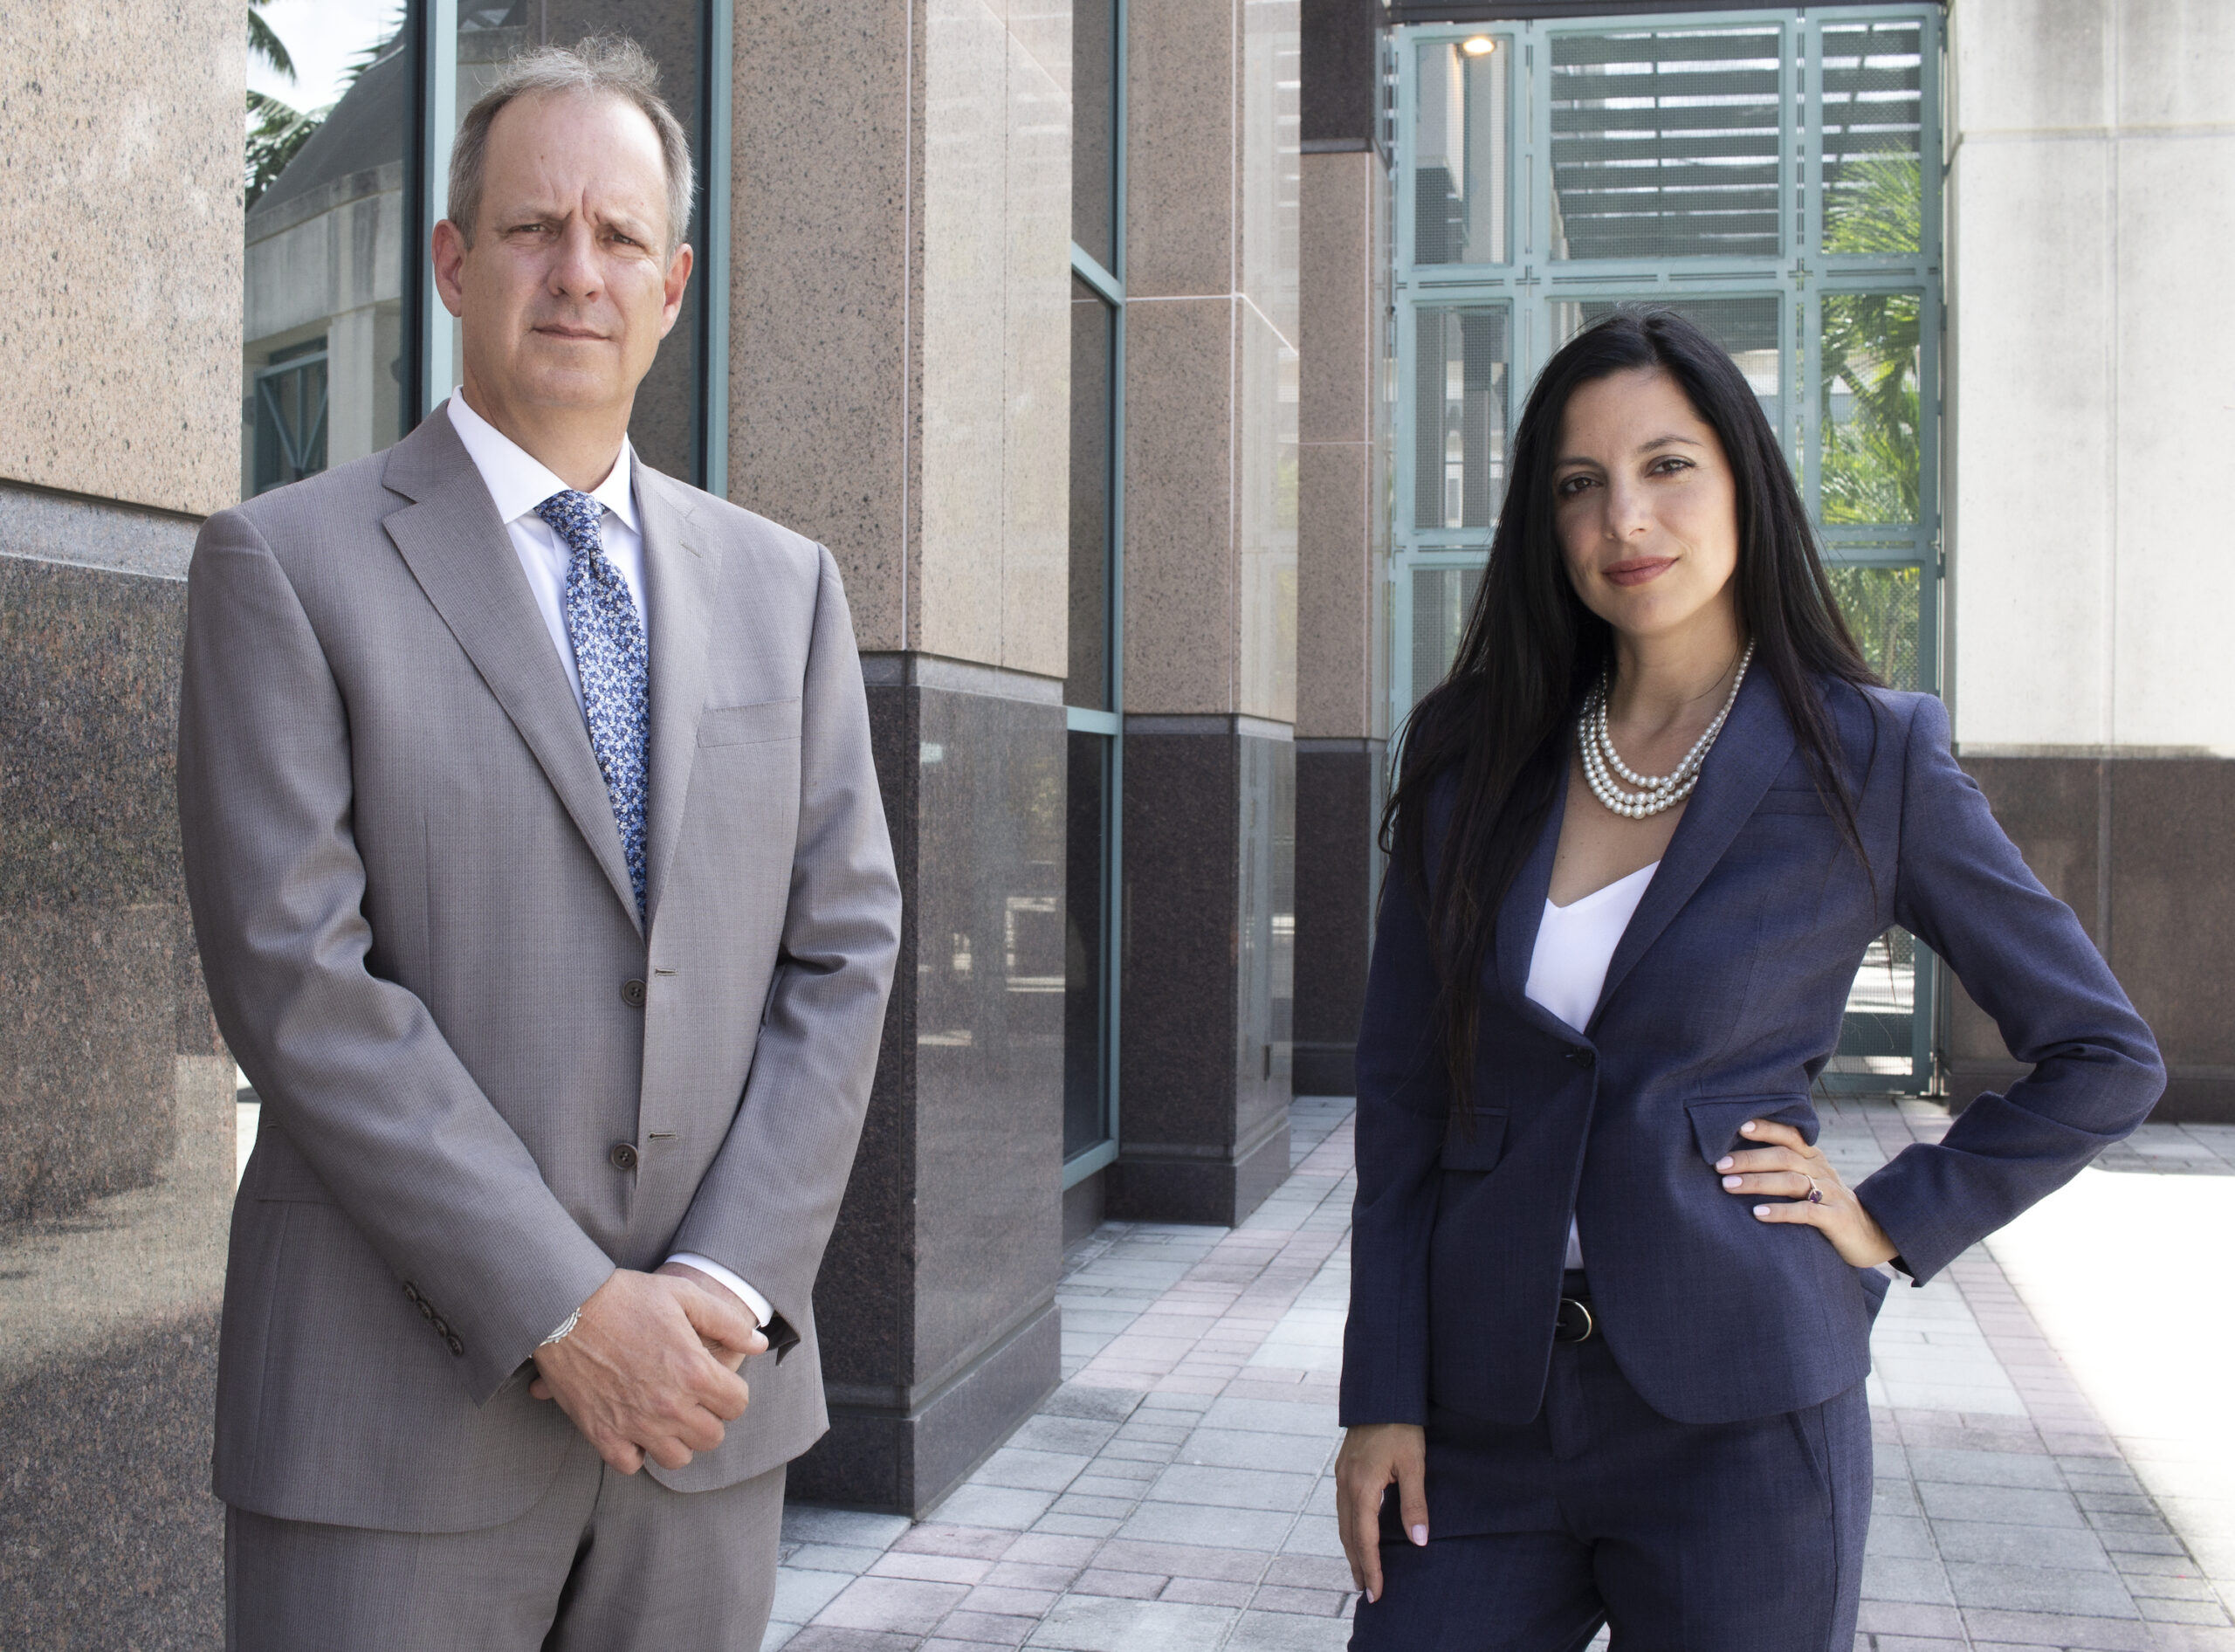 South Florida Motor Vehicle Accident Attorney